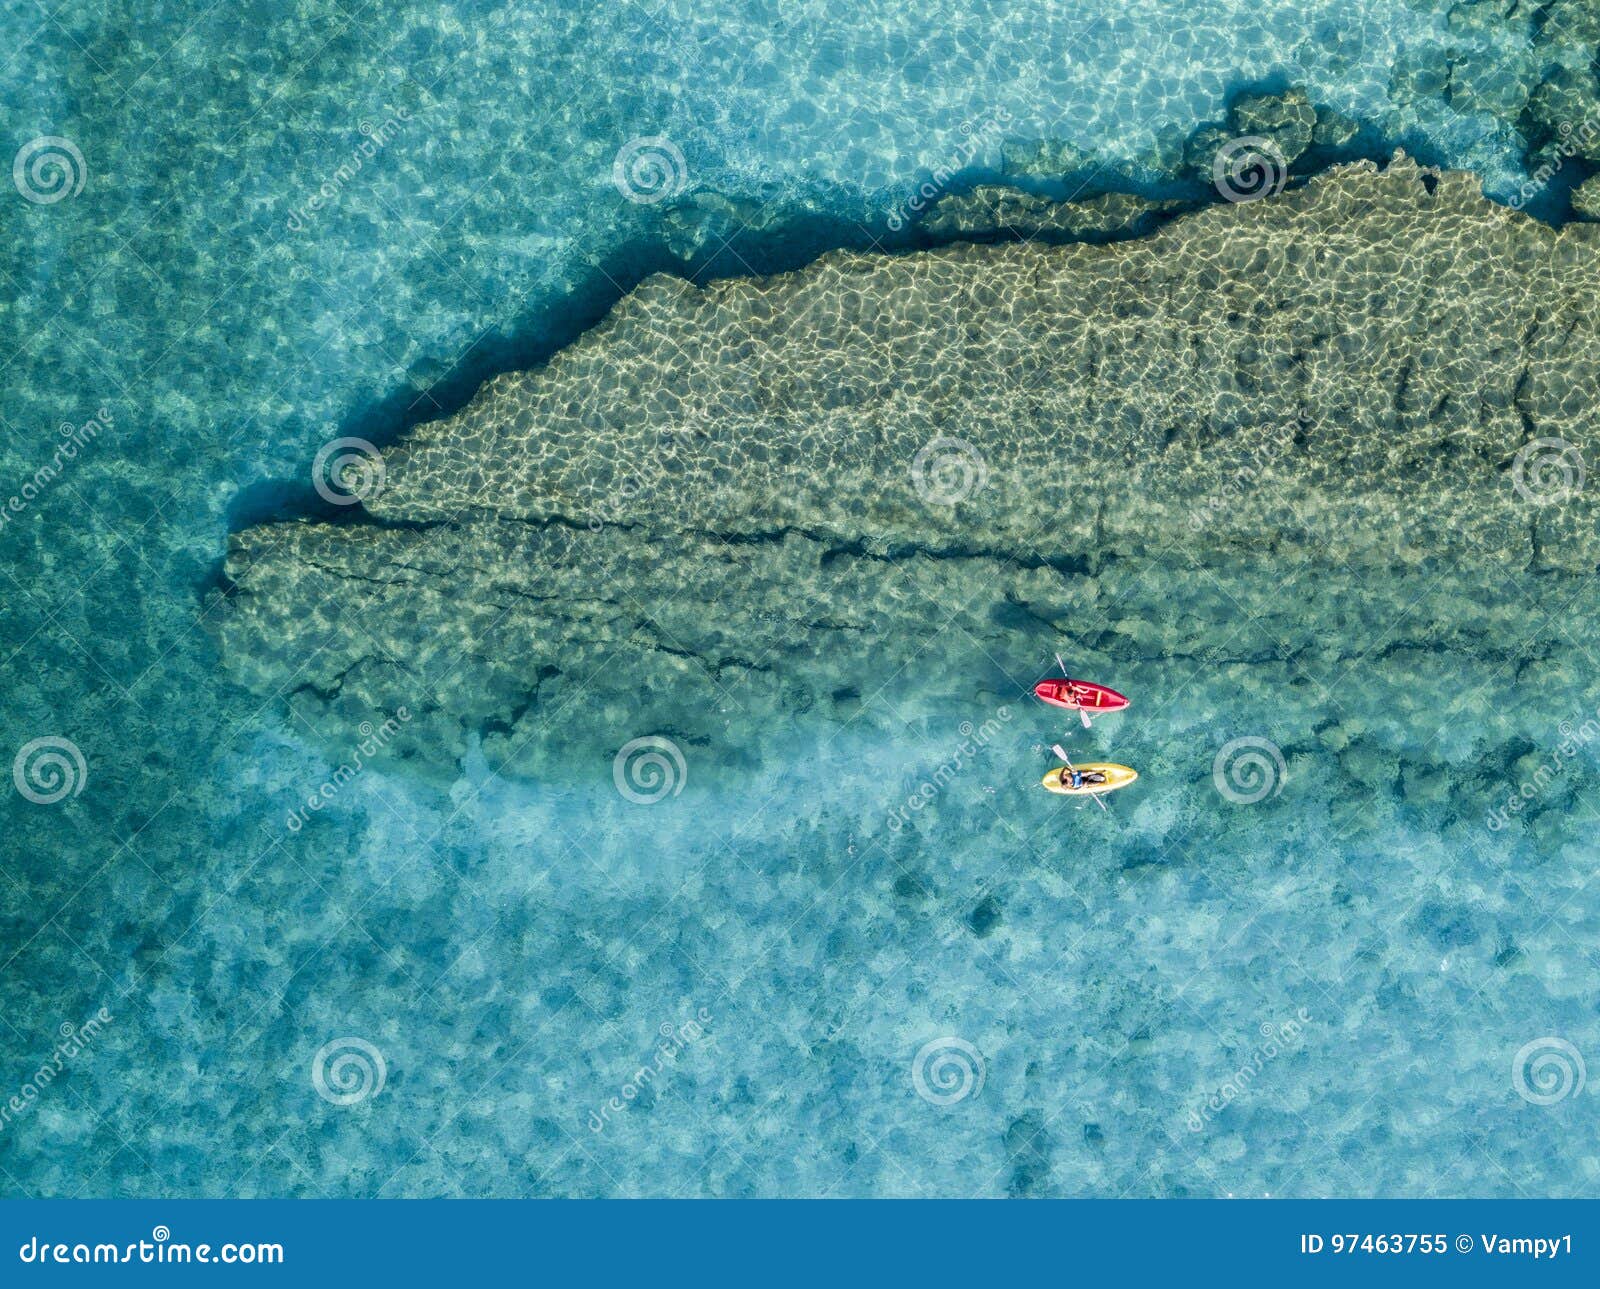 aerial view of a canoe in the water floating on a transparent sea. bathers at sea. zambrone, calabria, italy